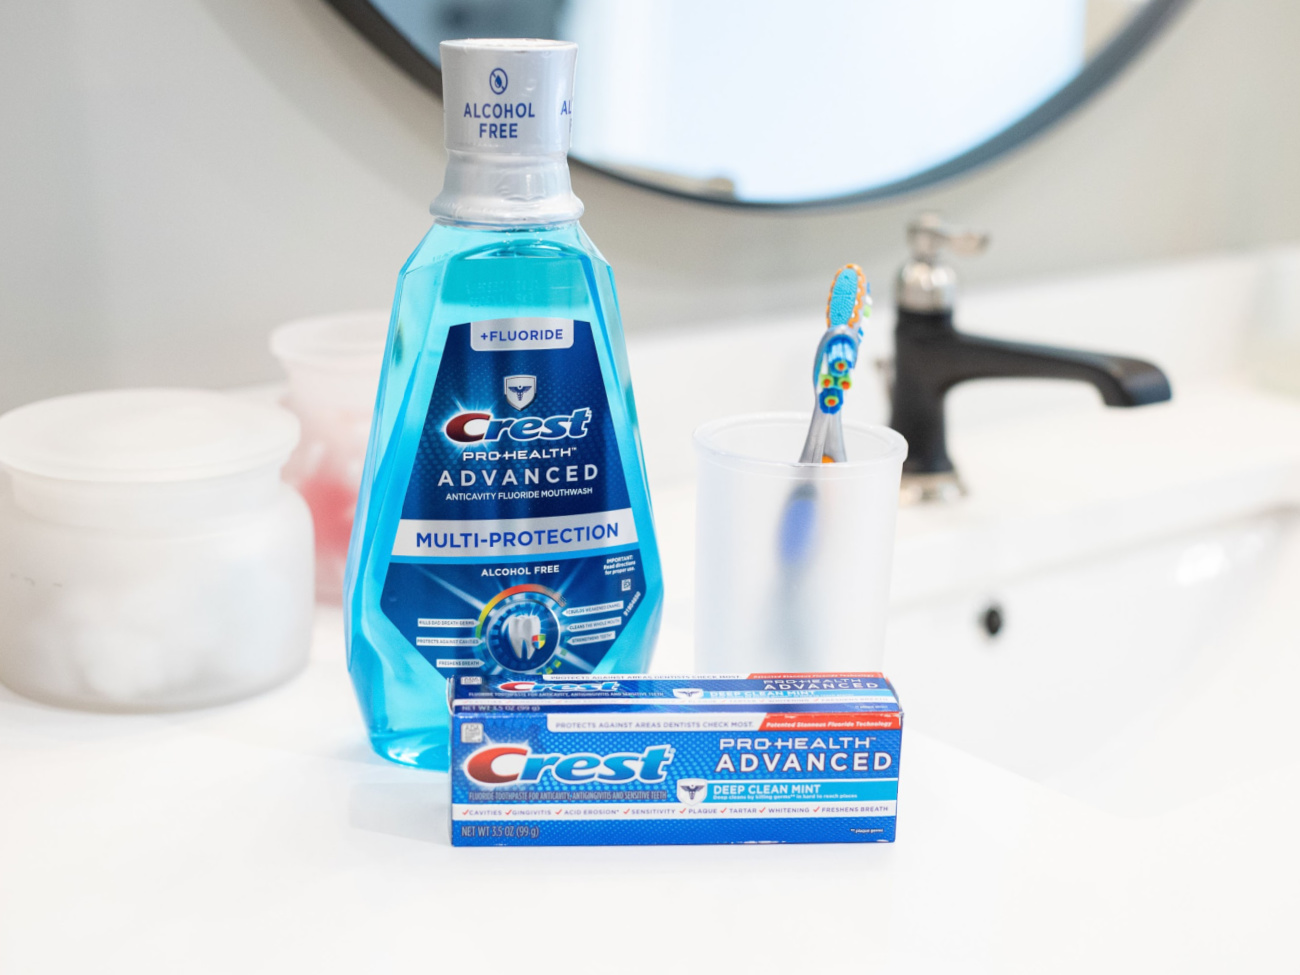 Crest Pro-Health Toothpaste As Low As $2.24 At Publix (Half The Regular Price)